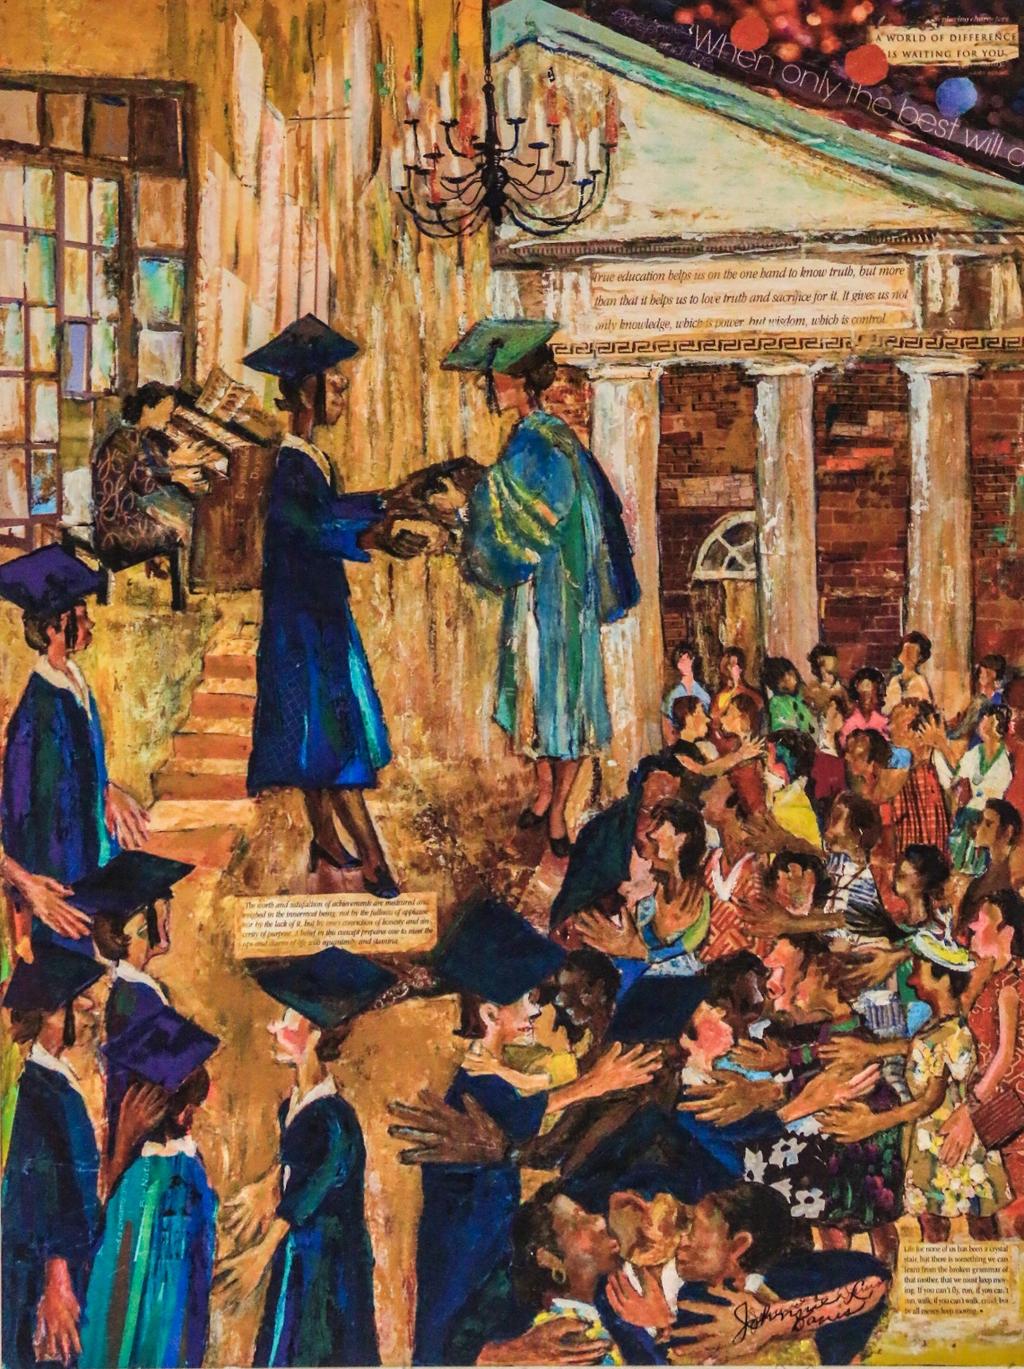 Graduation Spelman Seminary for Girls and Women issued its first high school diplomas in 1887. The seminary officially became Spelman College, a four-year liberal arts institution in 1924.